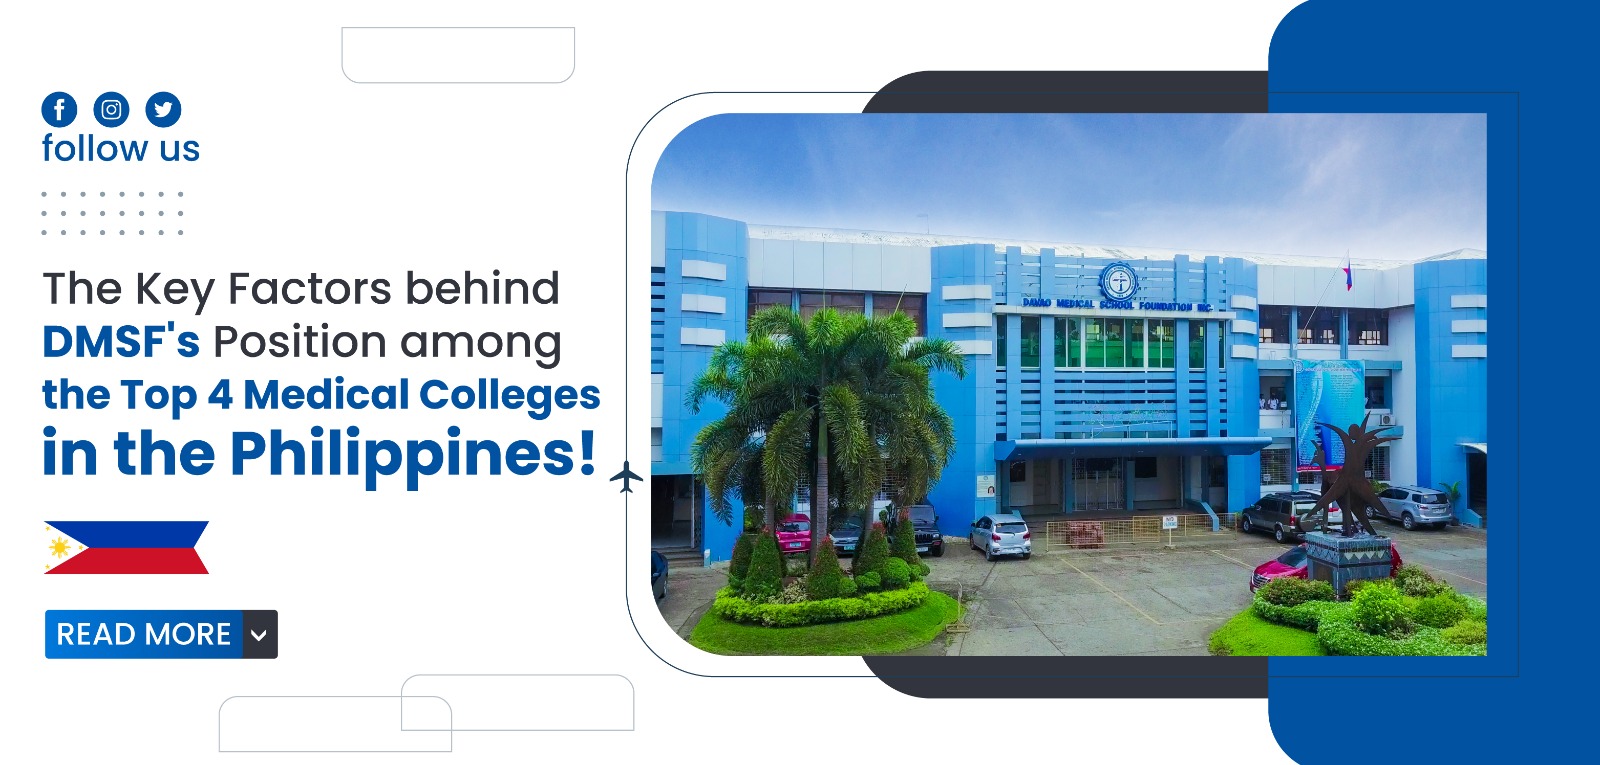 The Key Factors behind DMSF's Position among the Top 4 Medical Colleges in the Philippines!